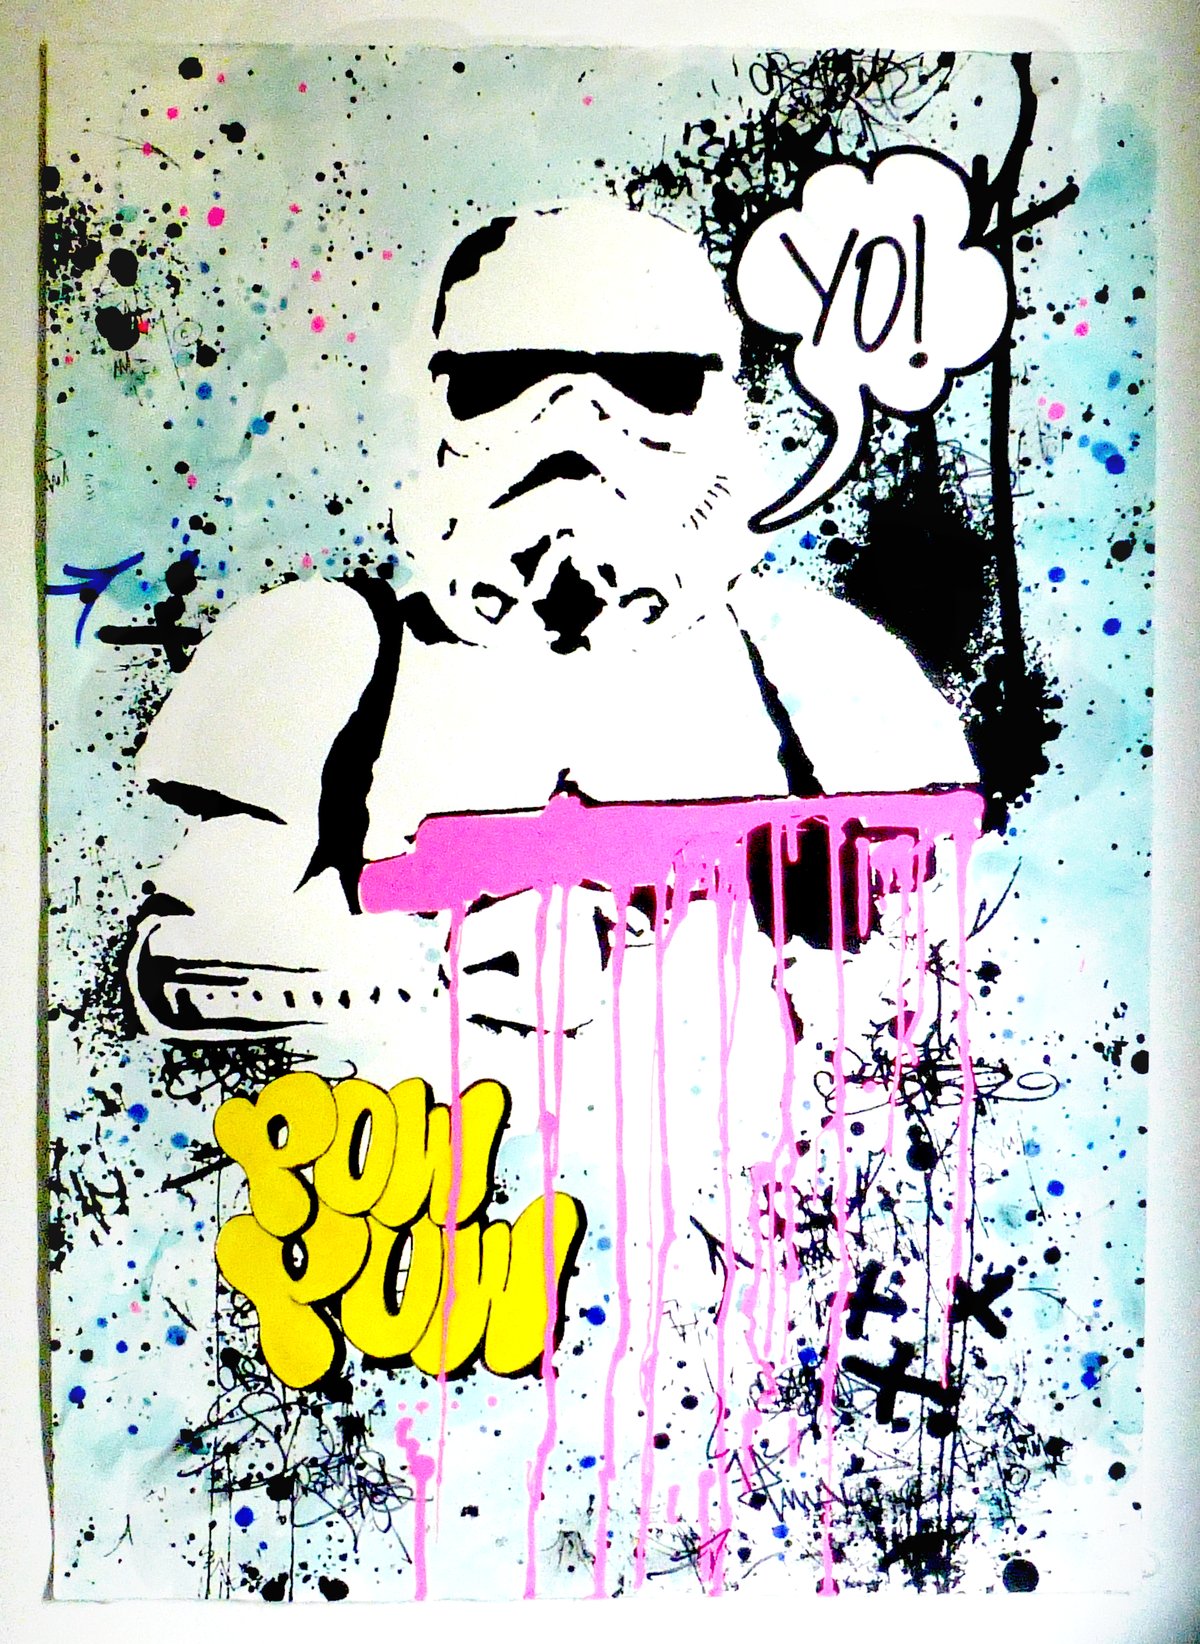 Image of YO! Star Wars Stormtrooper. (Pink edition hand painted, signed)